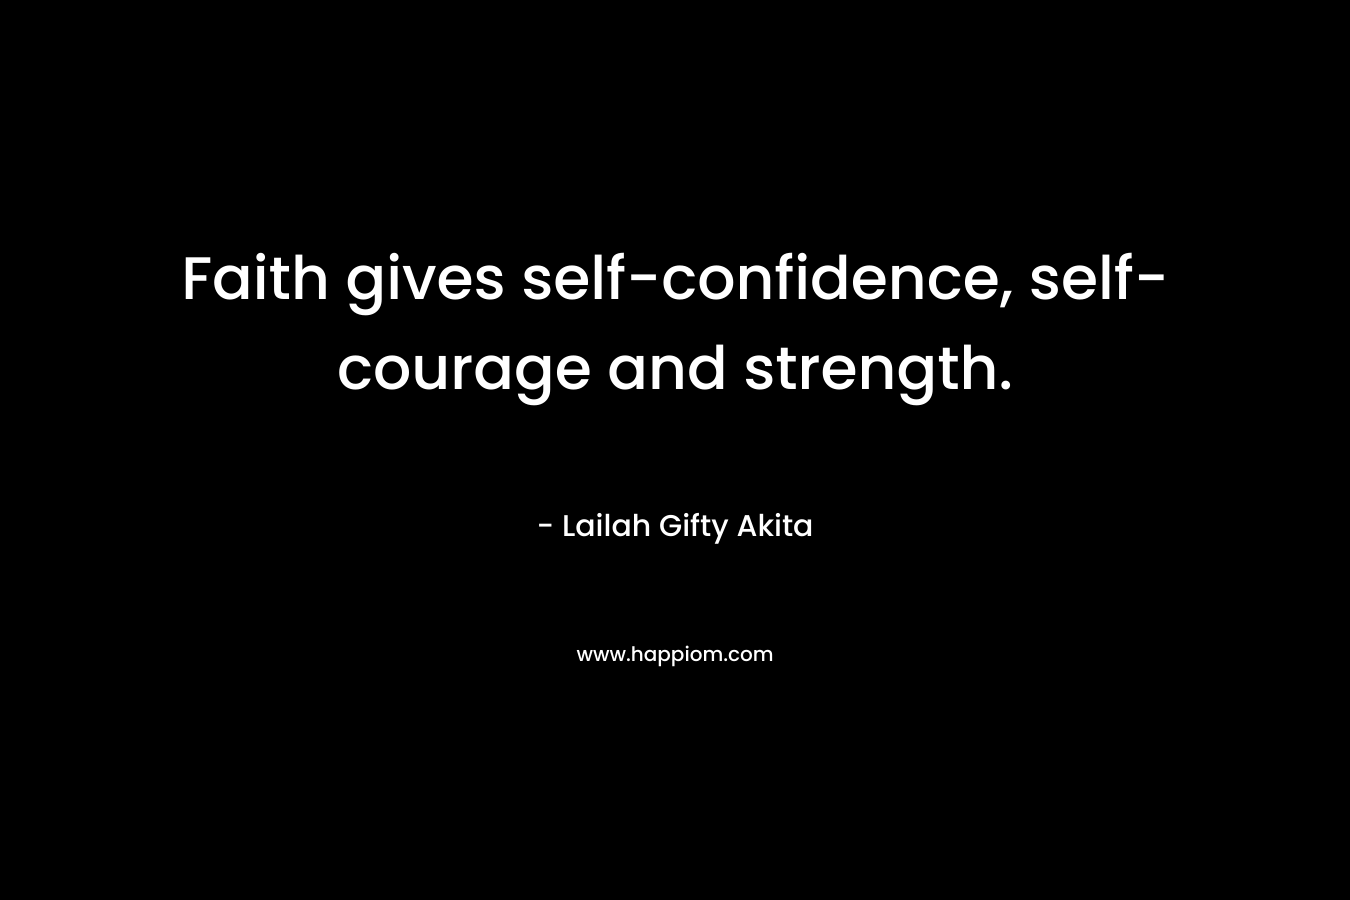 Faith gives self-confidence, self-courage and strength.